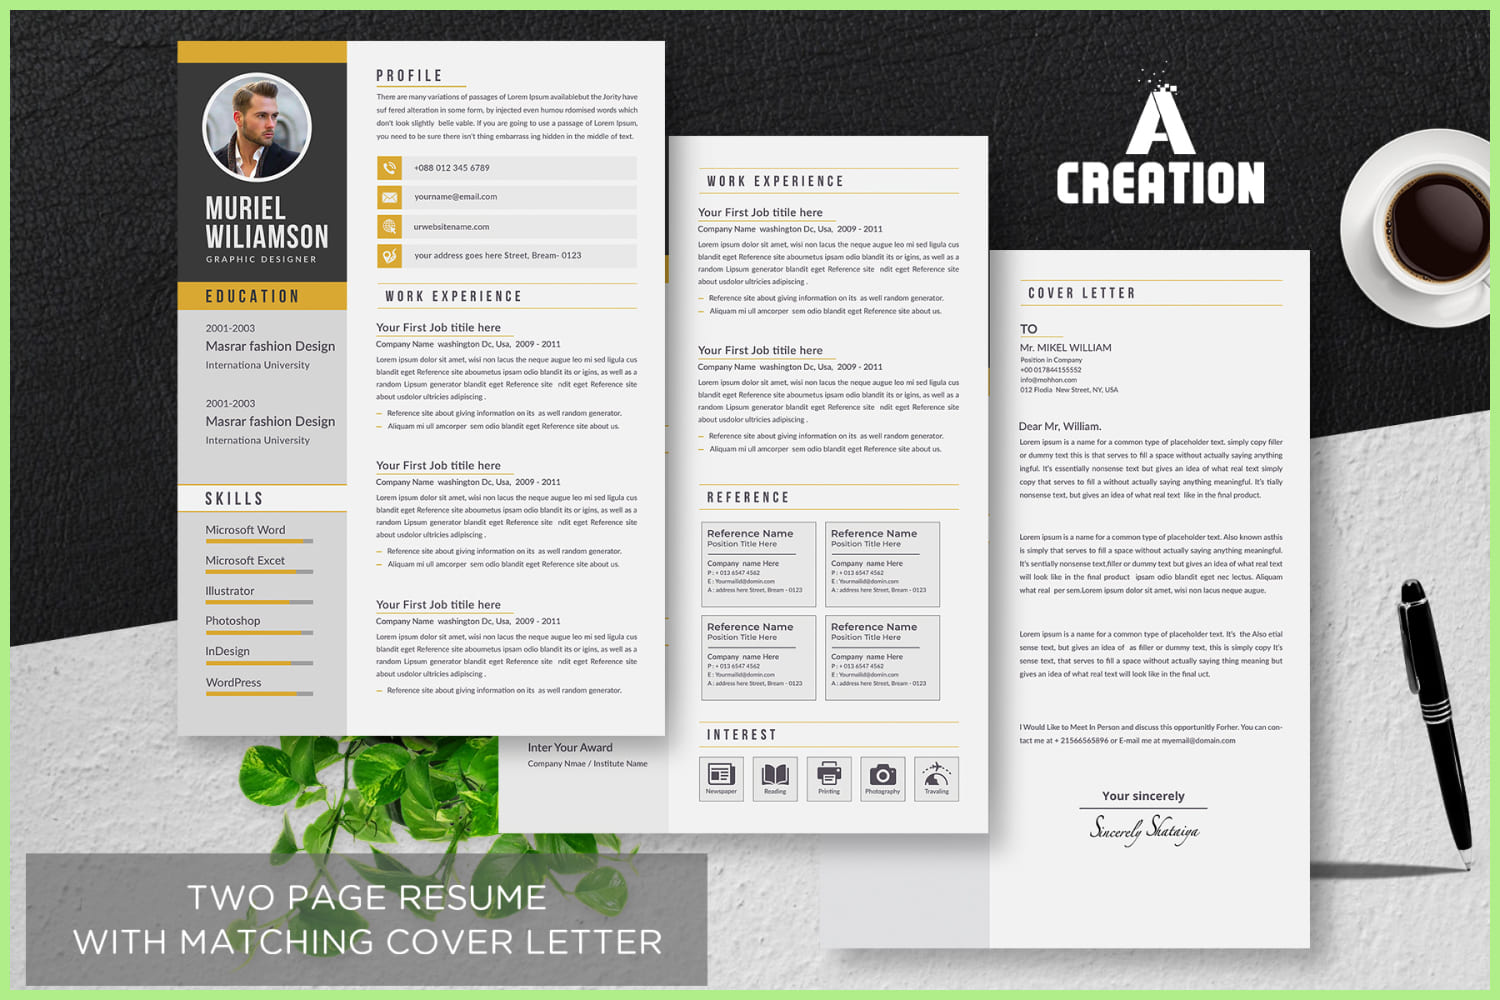 Three resume pages with yellow stripes and accents.